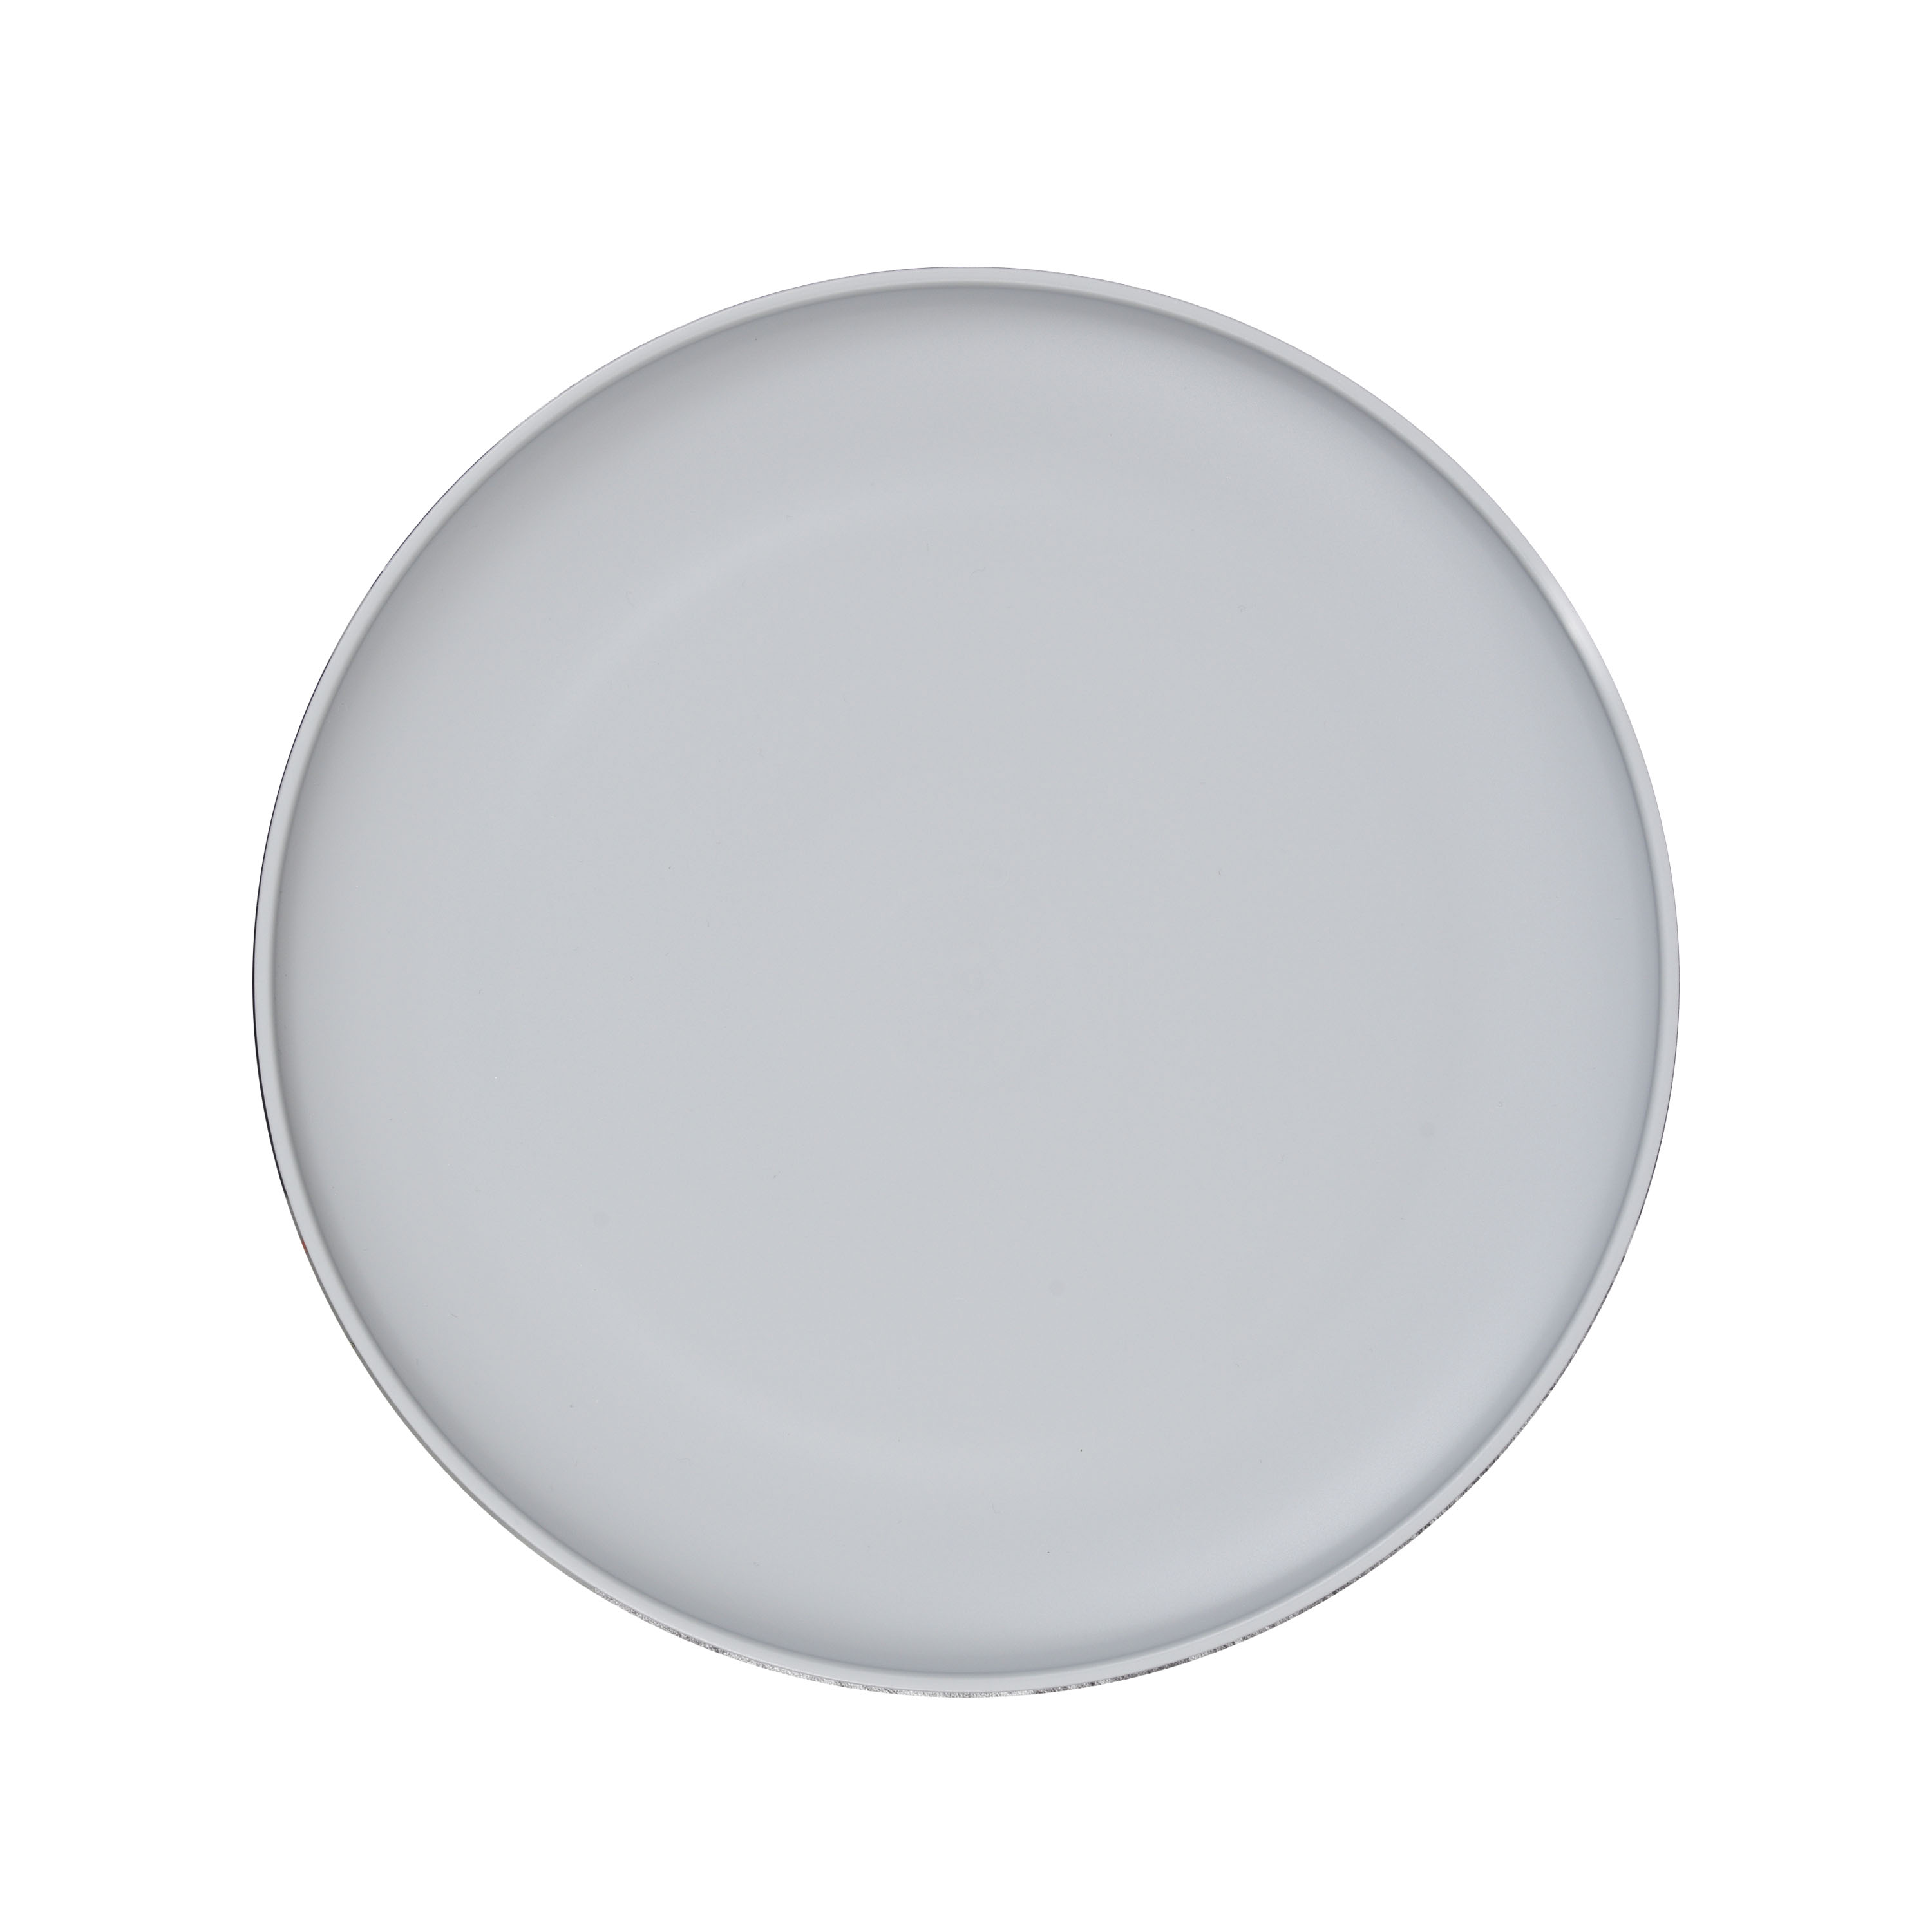 Mainstays - Gray Round Plastic Plate, 10.5 inch - image 1 of 4